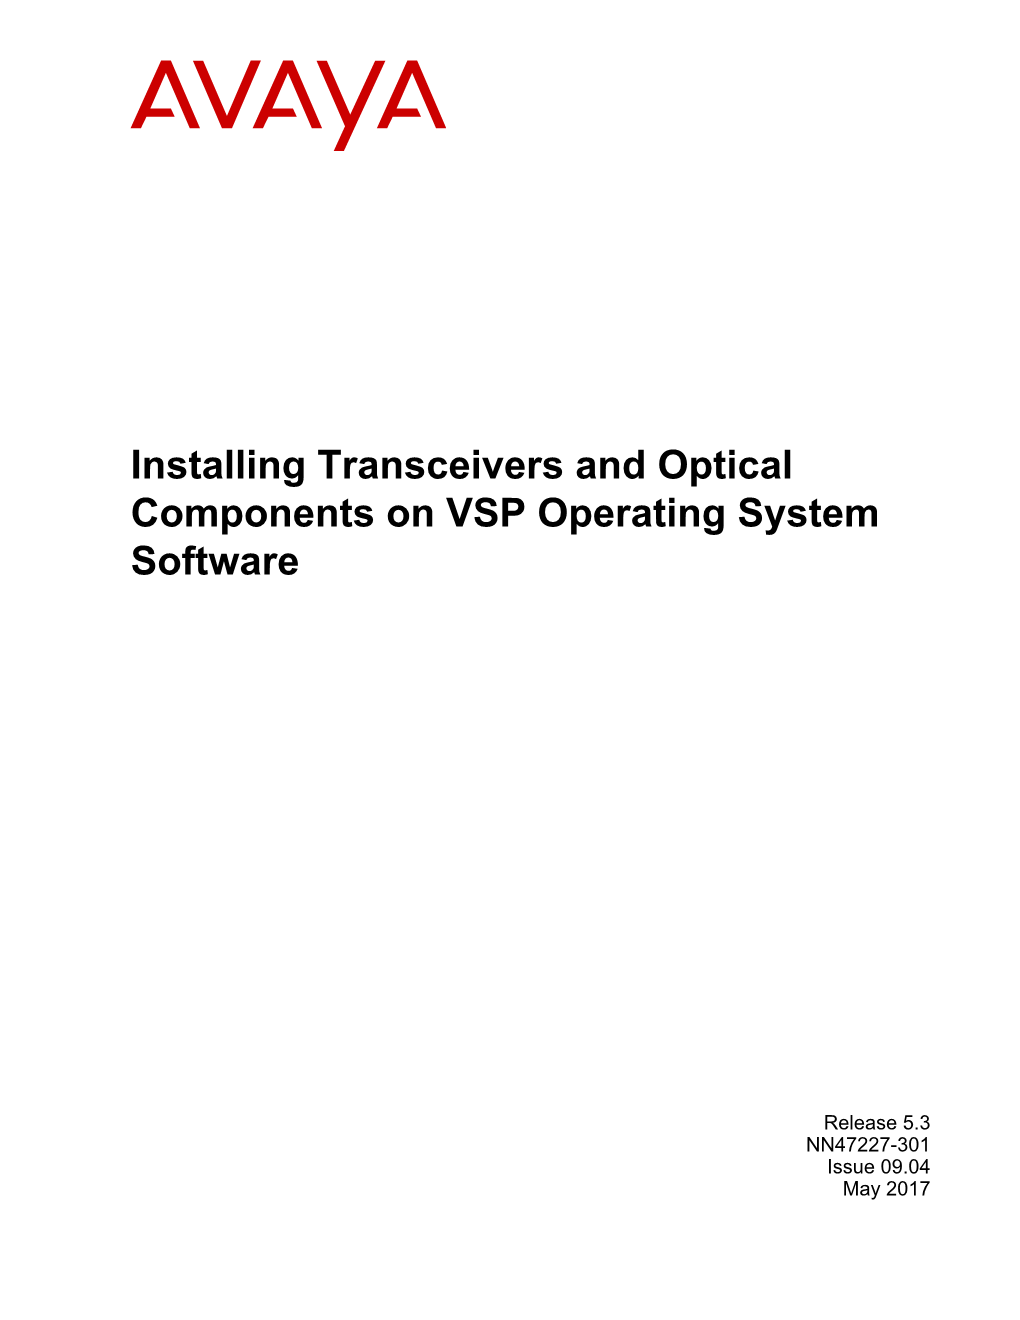 Installing Transceivers and Optical Components on VSP Operating System Software